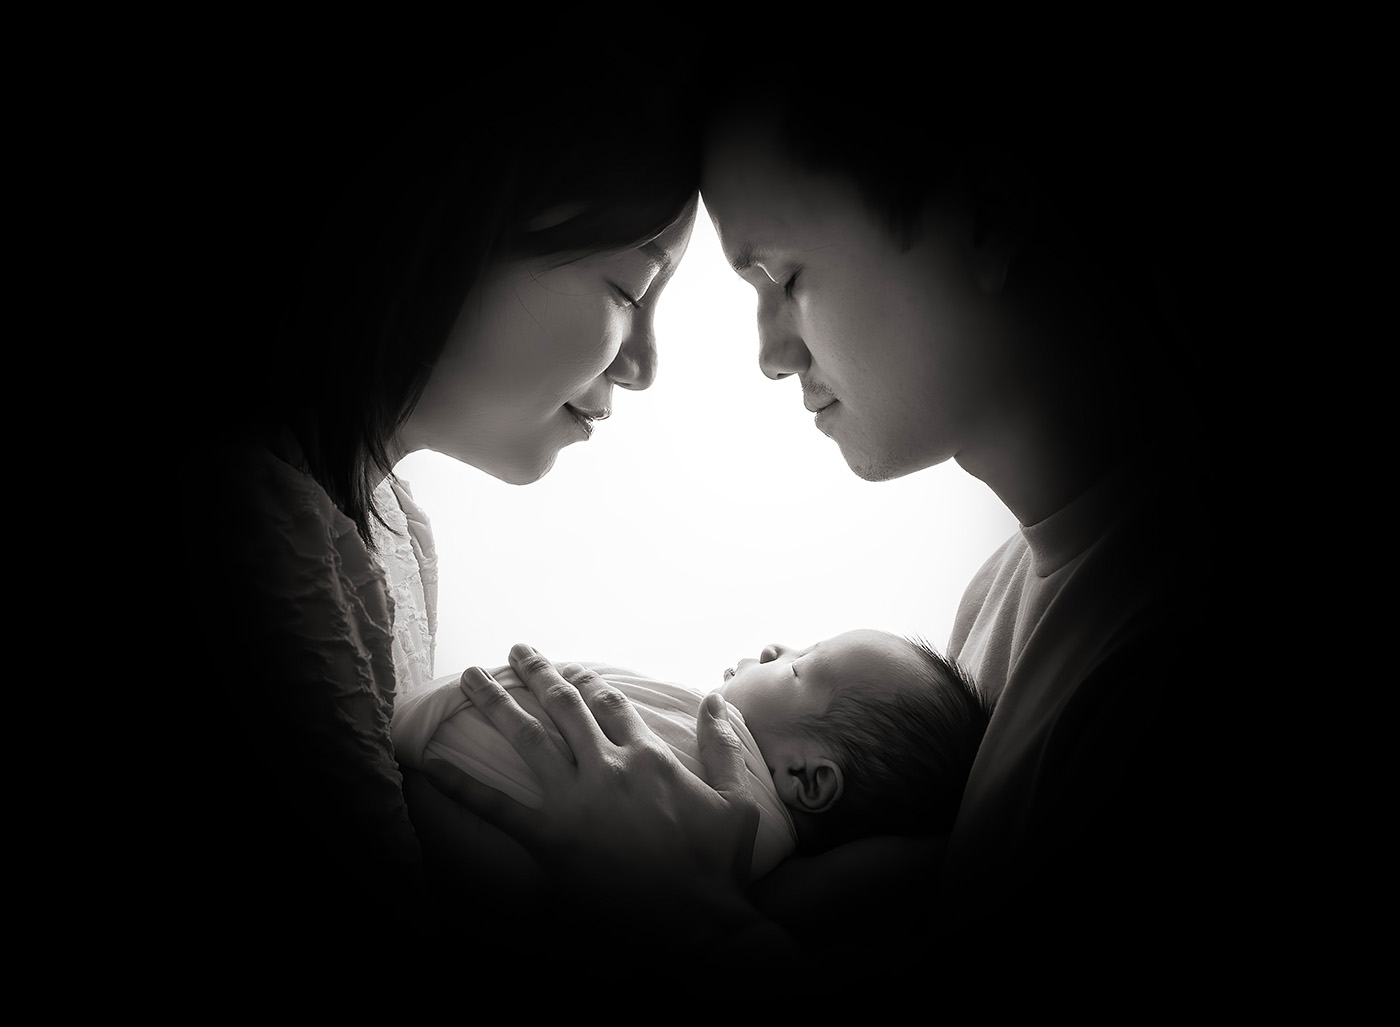 newborn parents watching over their new baby with heads together in black and white